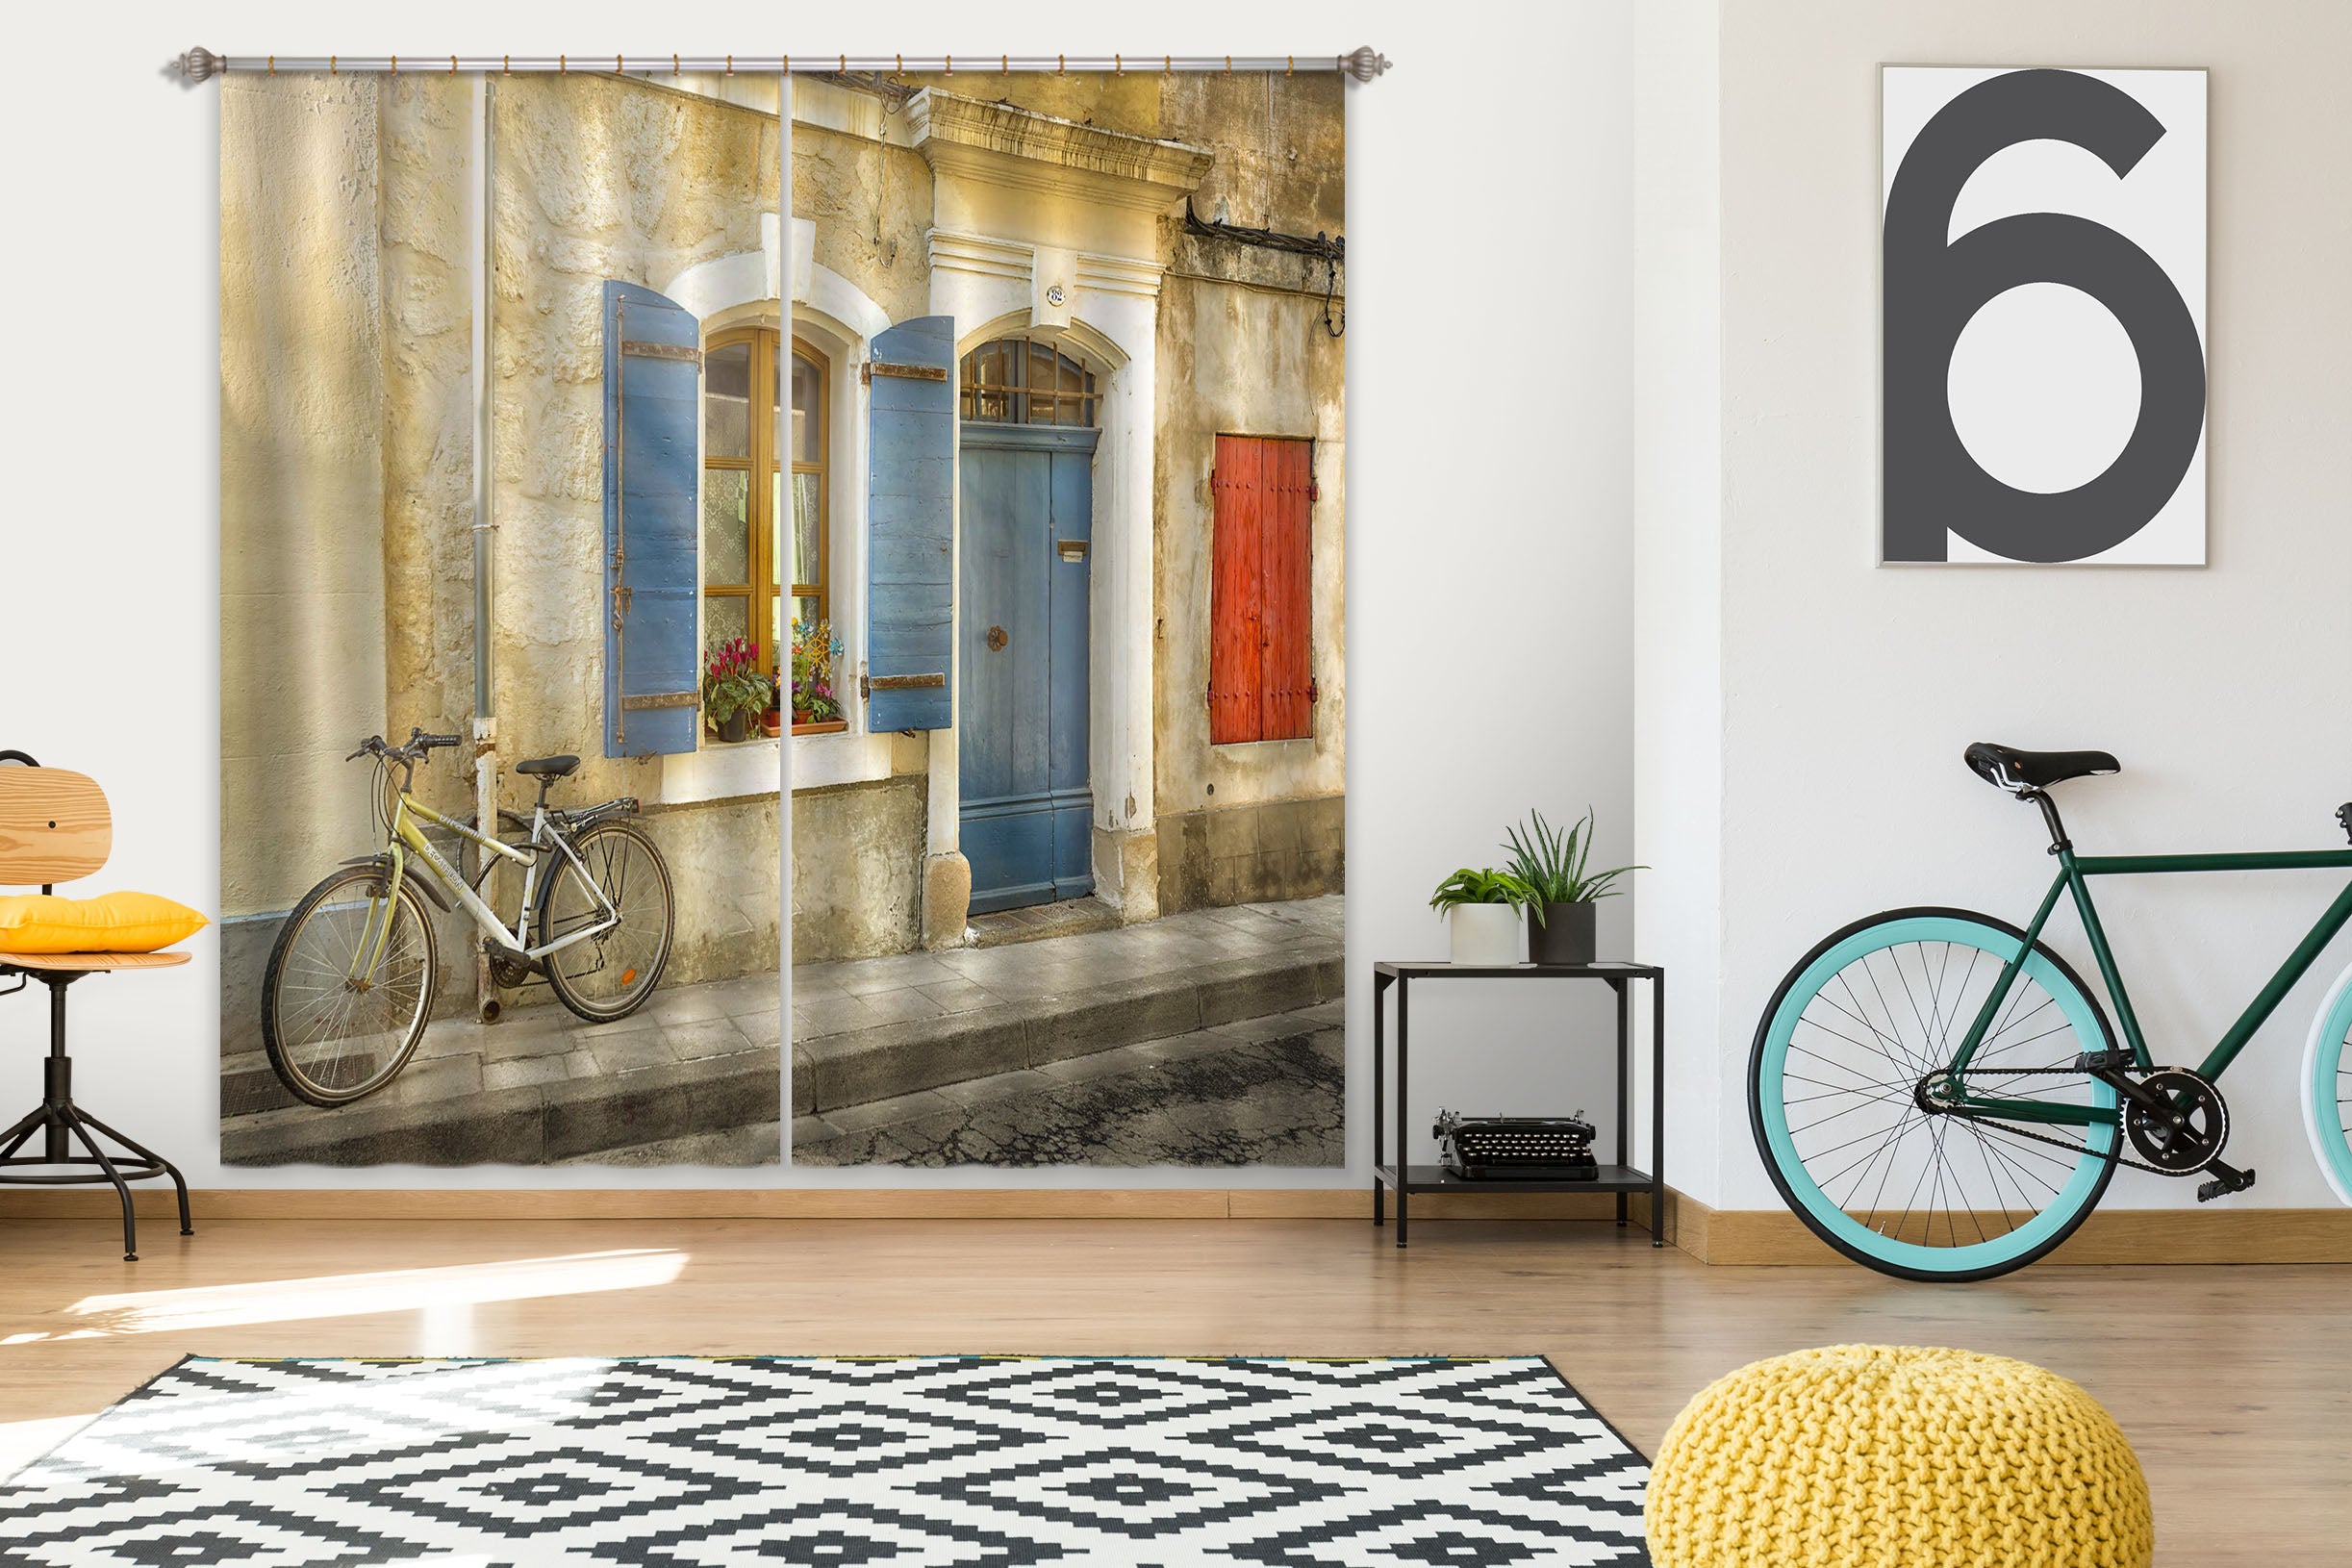 3D Retro Bicycle 046 Marco Carmassi Curtain Curtains Drapes